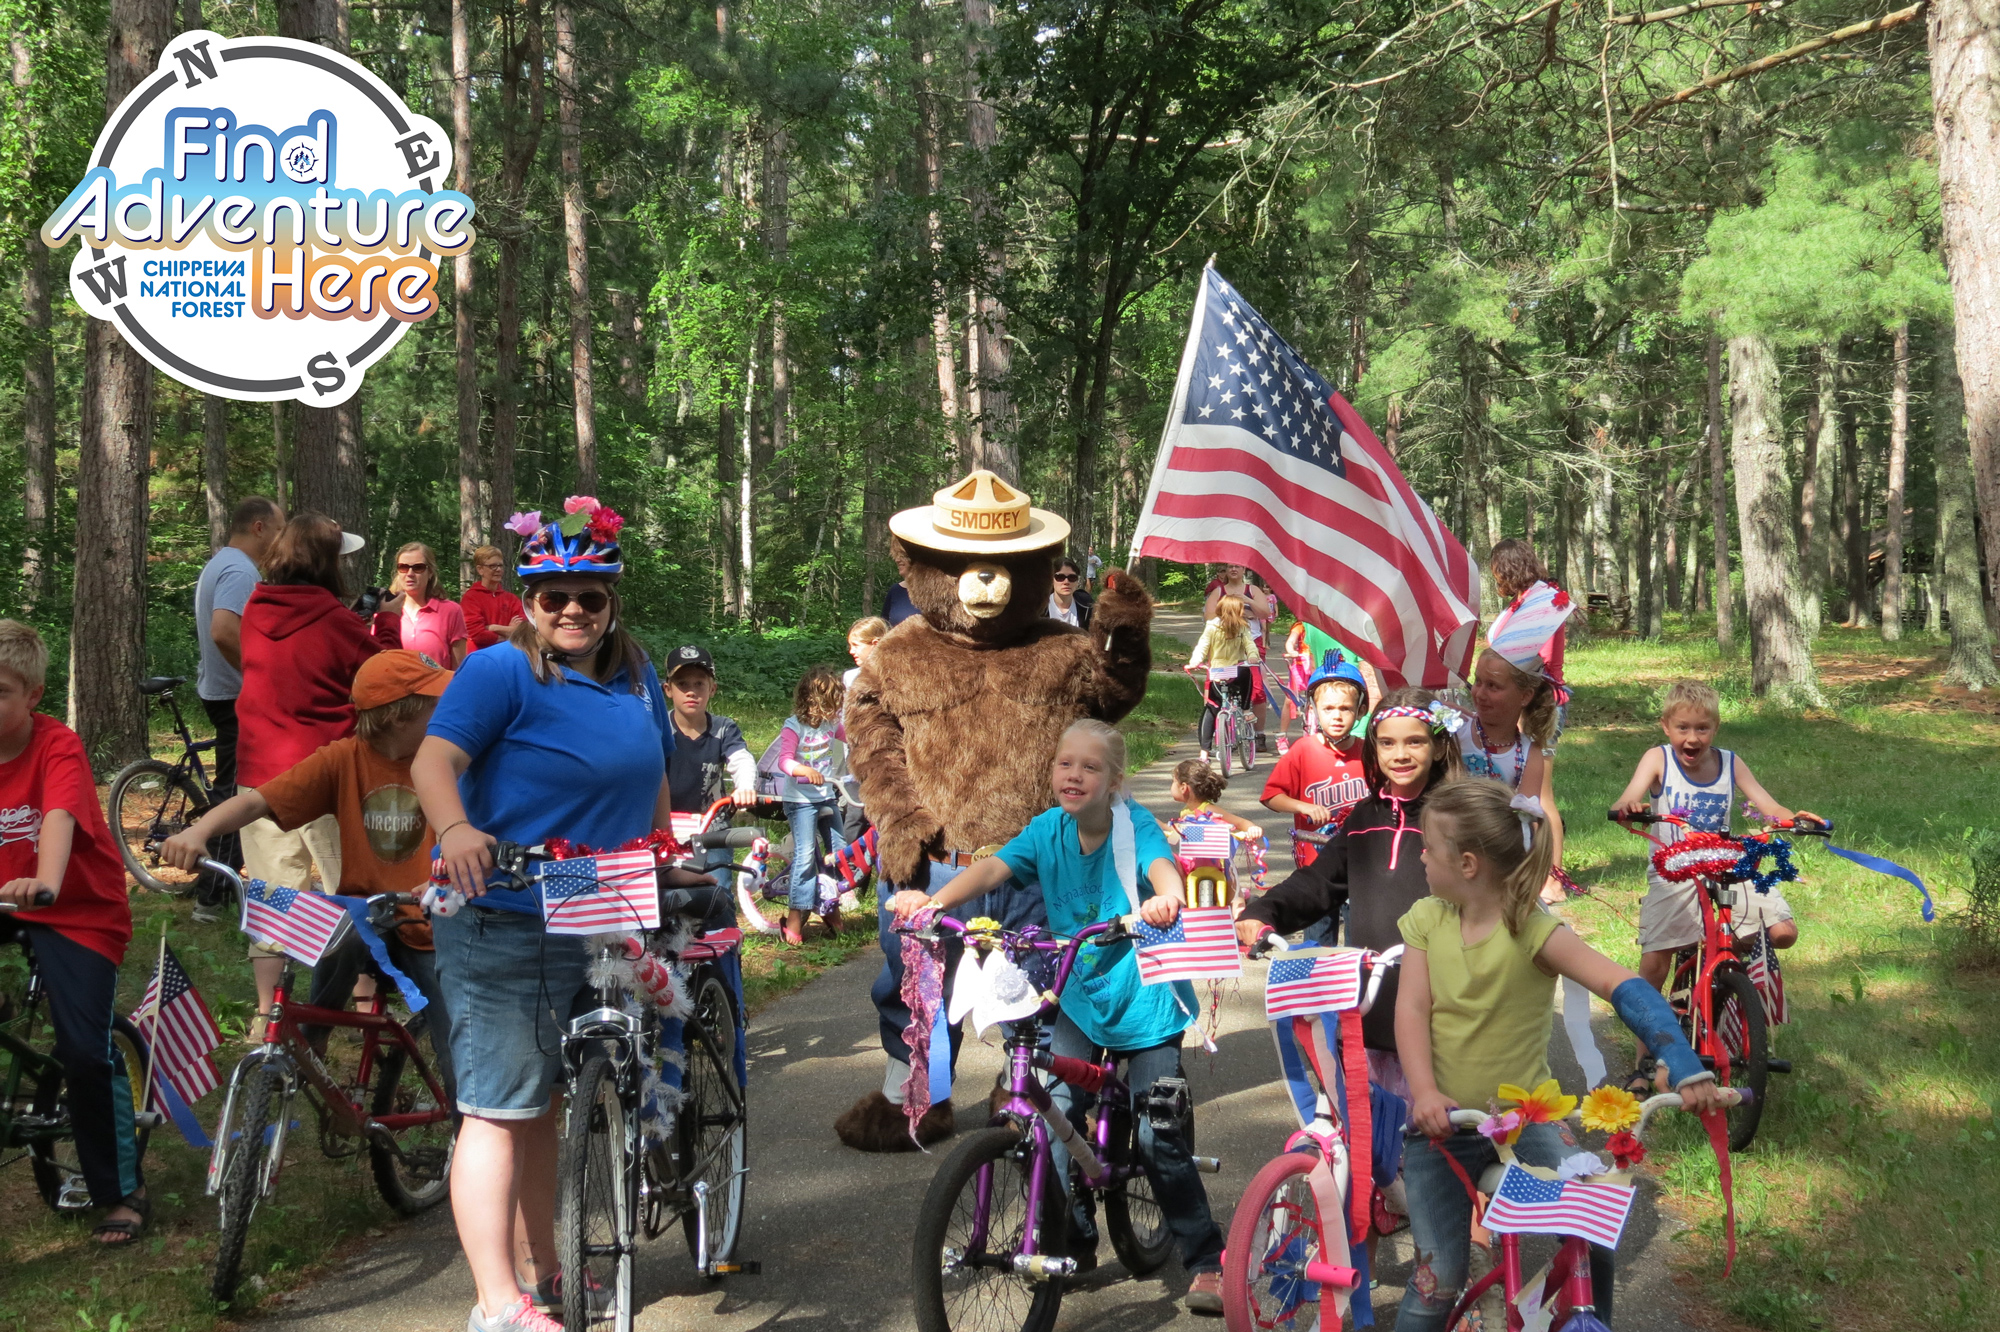 A bike parade with Smokey Bear with a Find Adventure Here Chippewa National Forest icon.